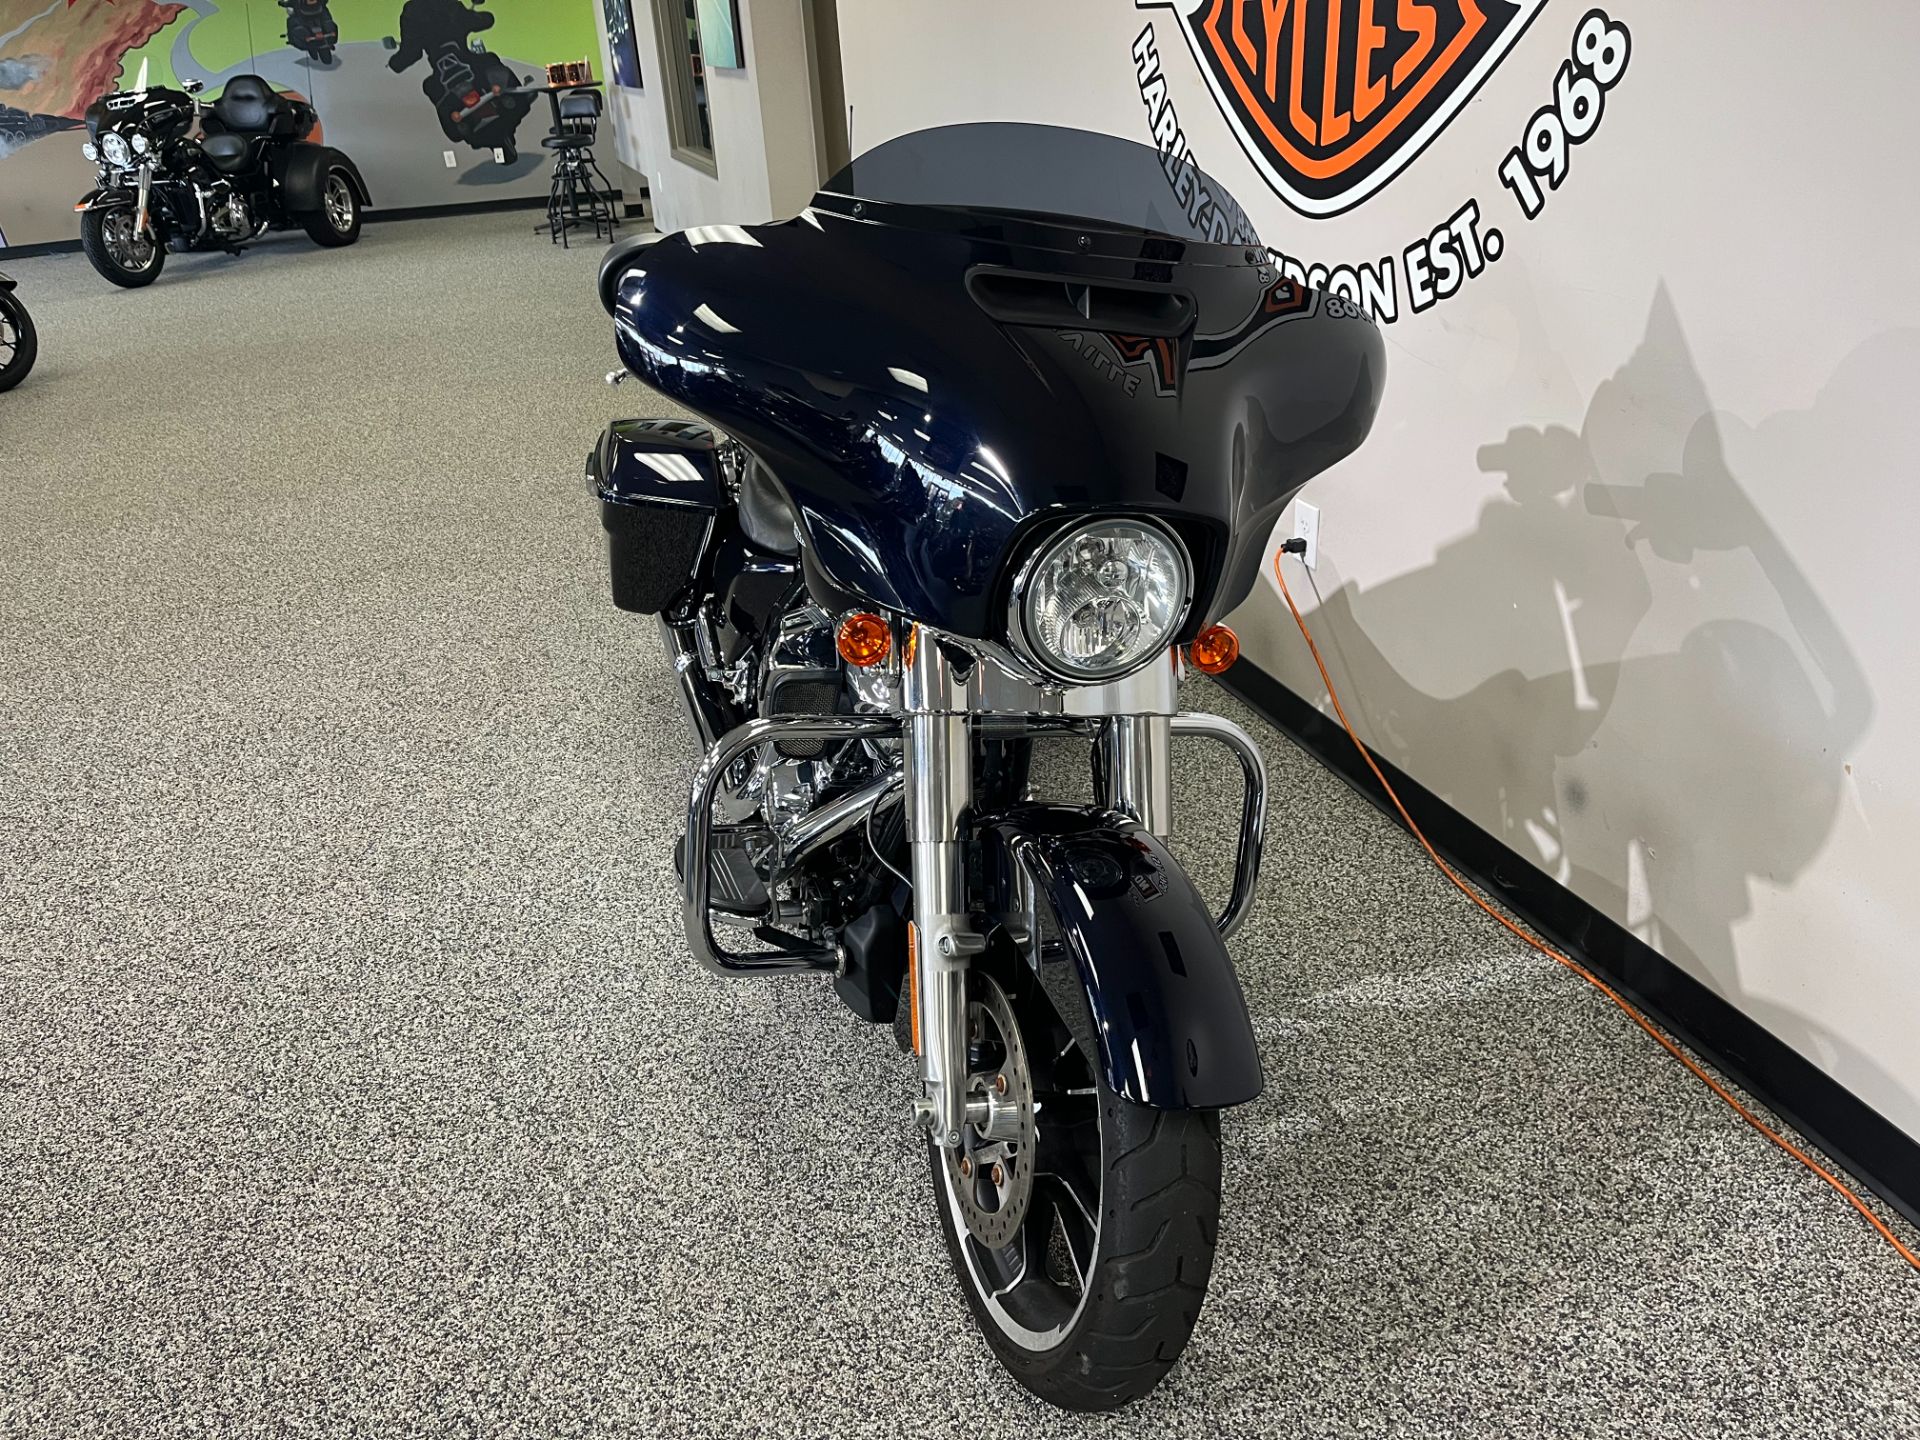 2020 Harley-Davidson Street Glide® in Knoxville, Tennessee - Photo 3